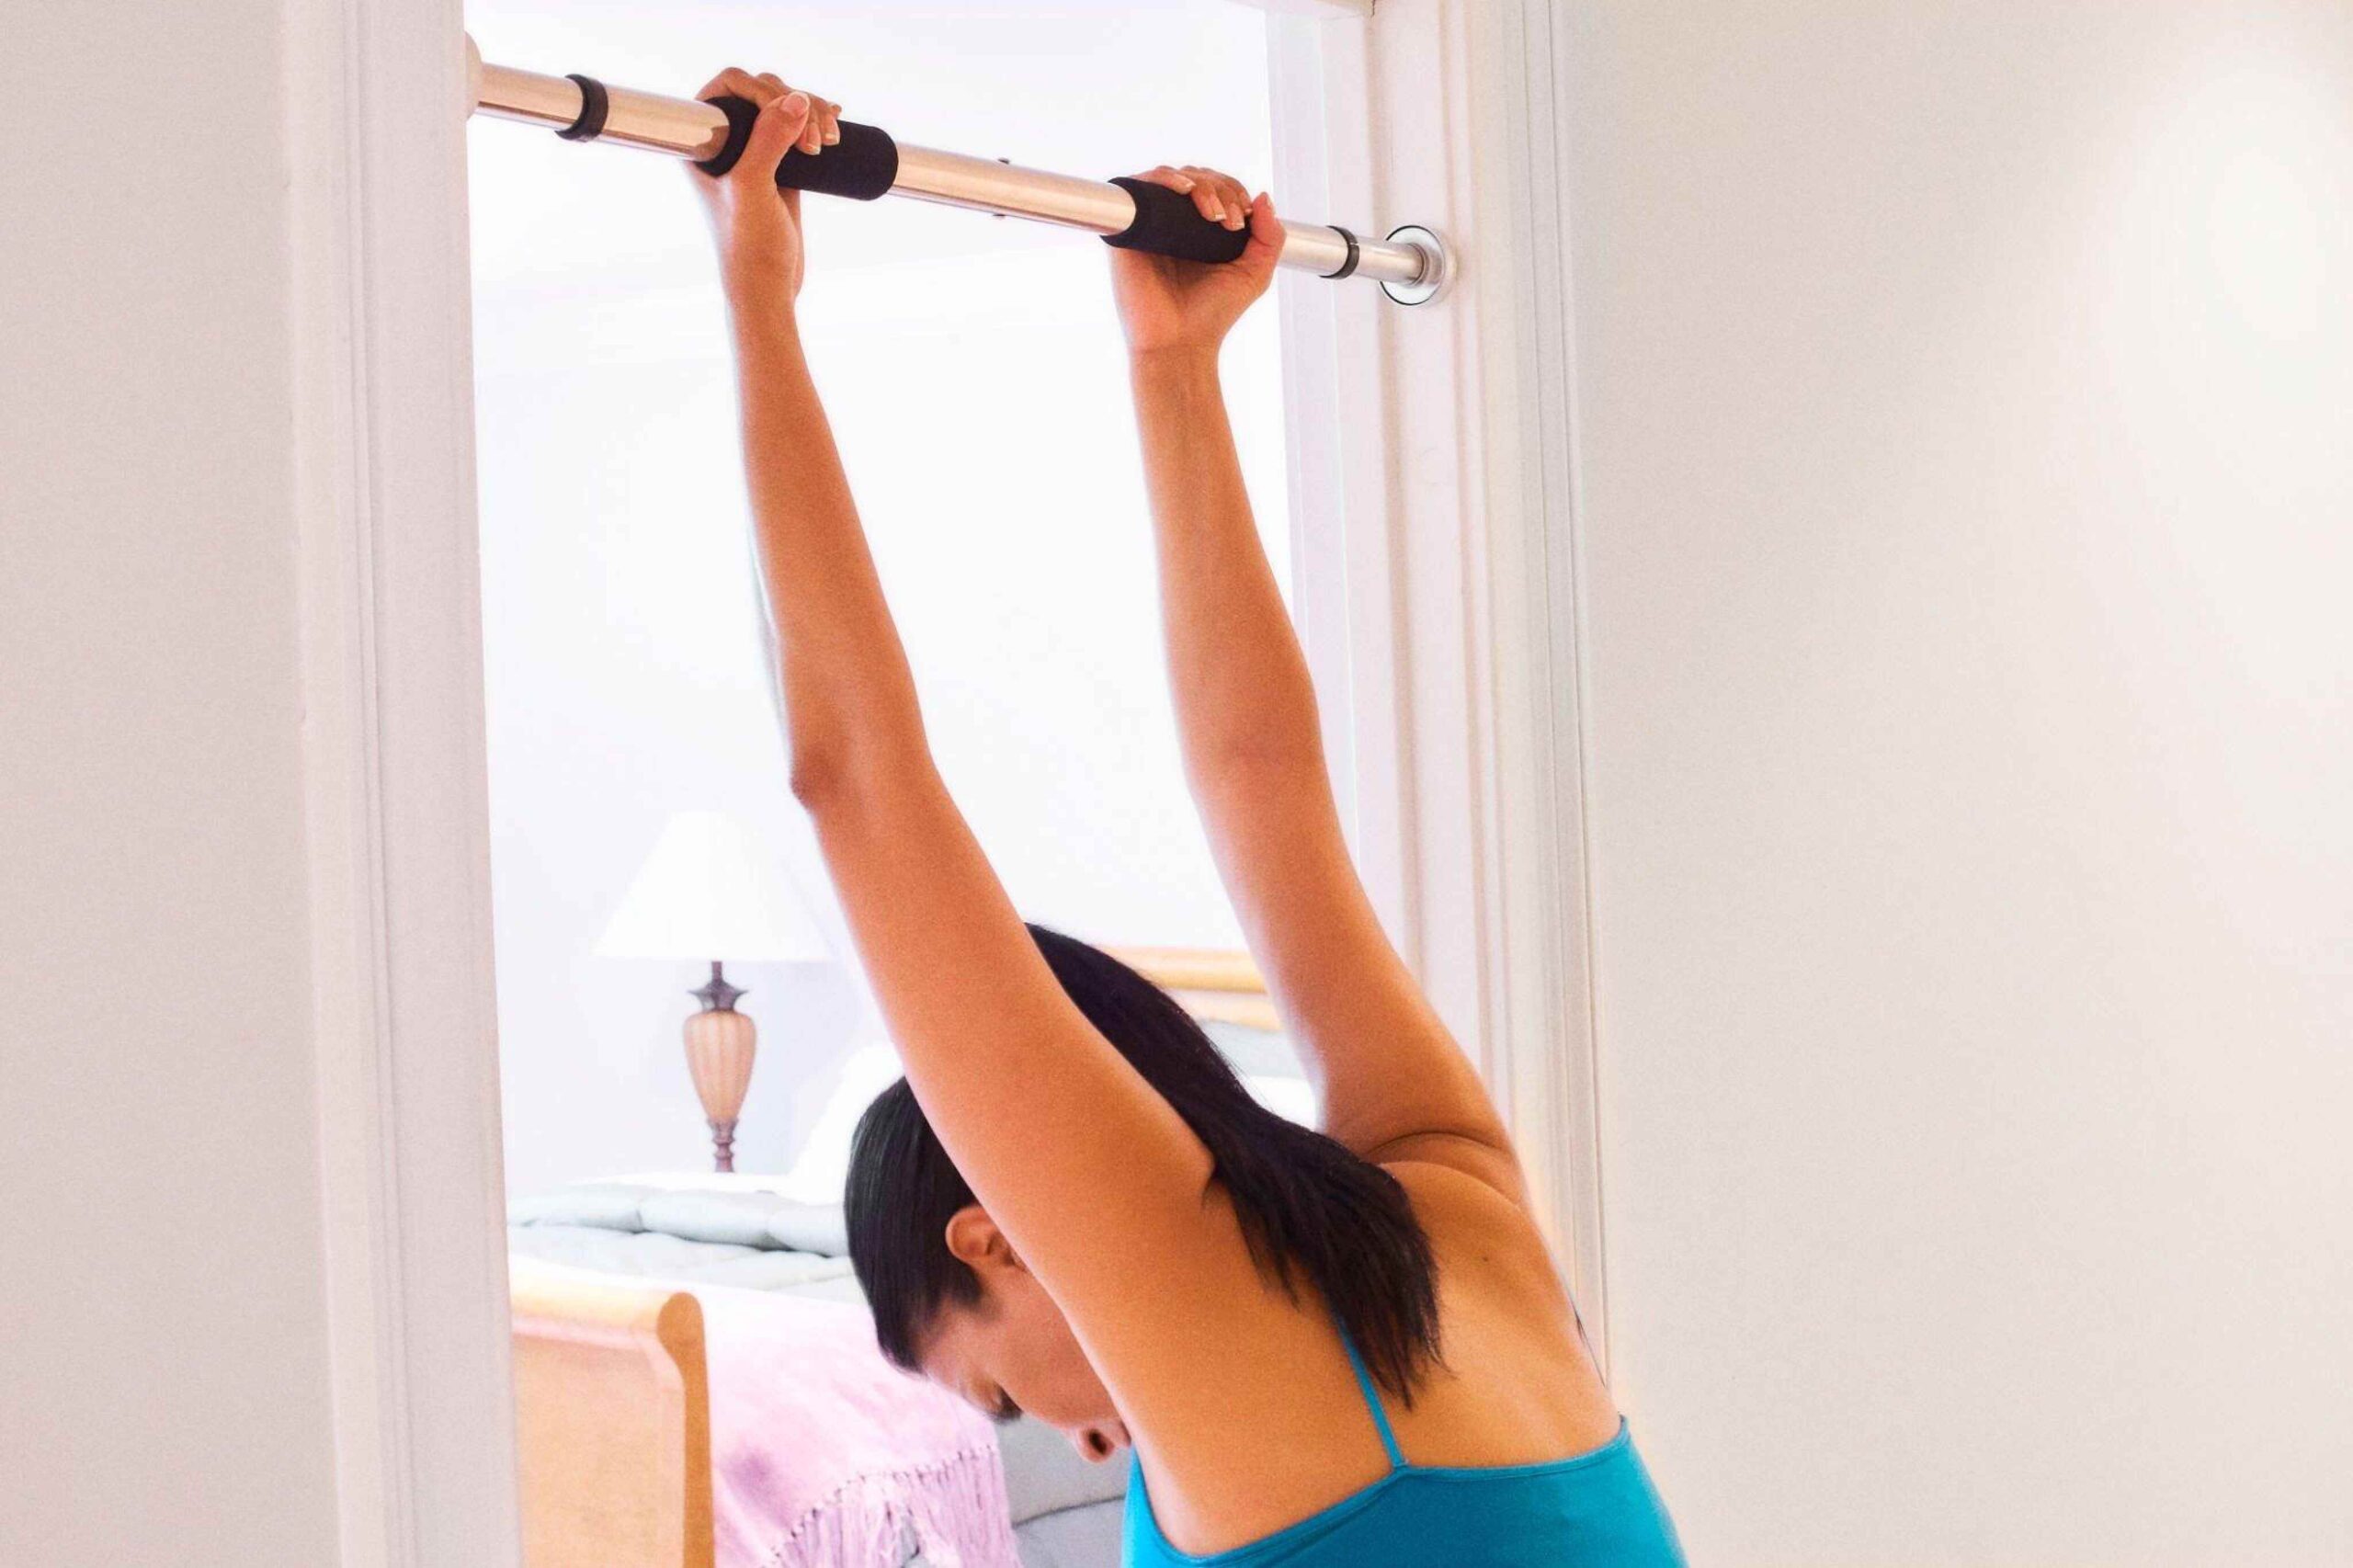 Strength Training At Home: How Basketball Players Use Door Pull-Up Bars For Upper Body Development